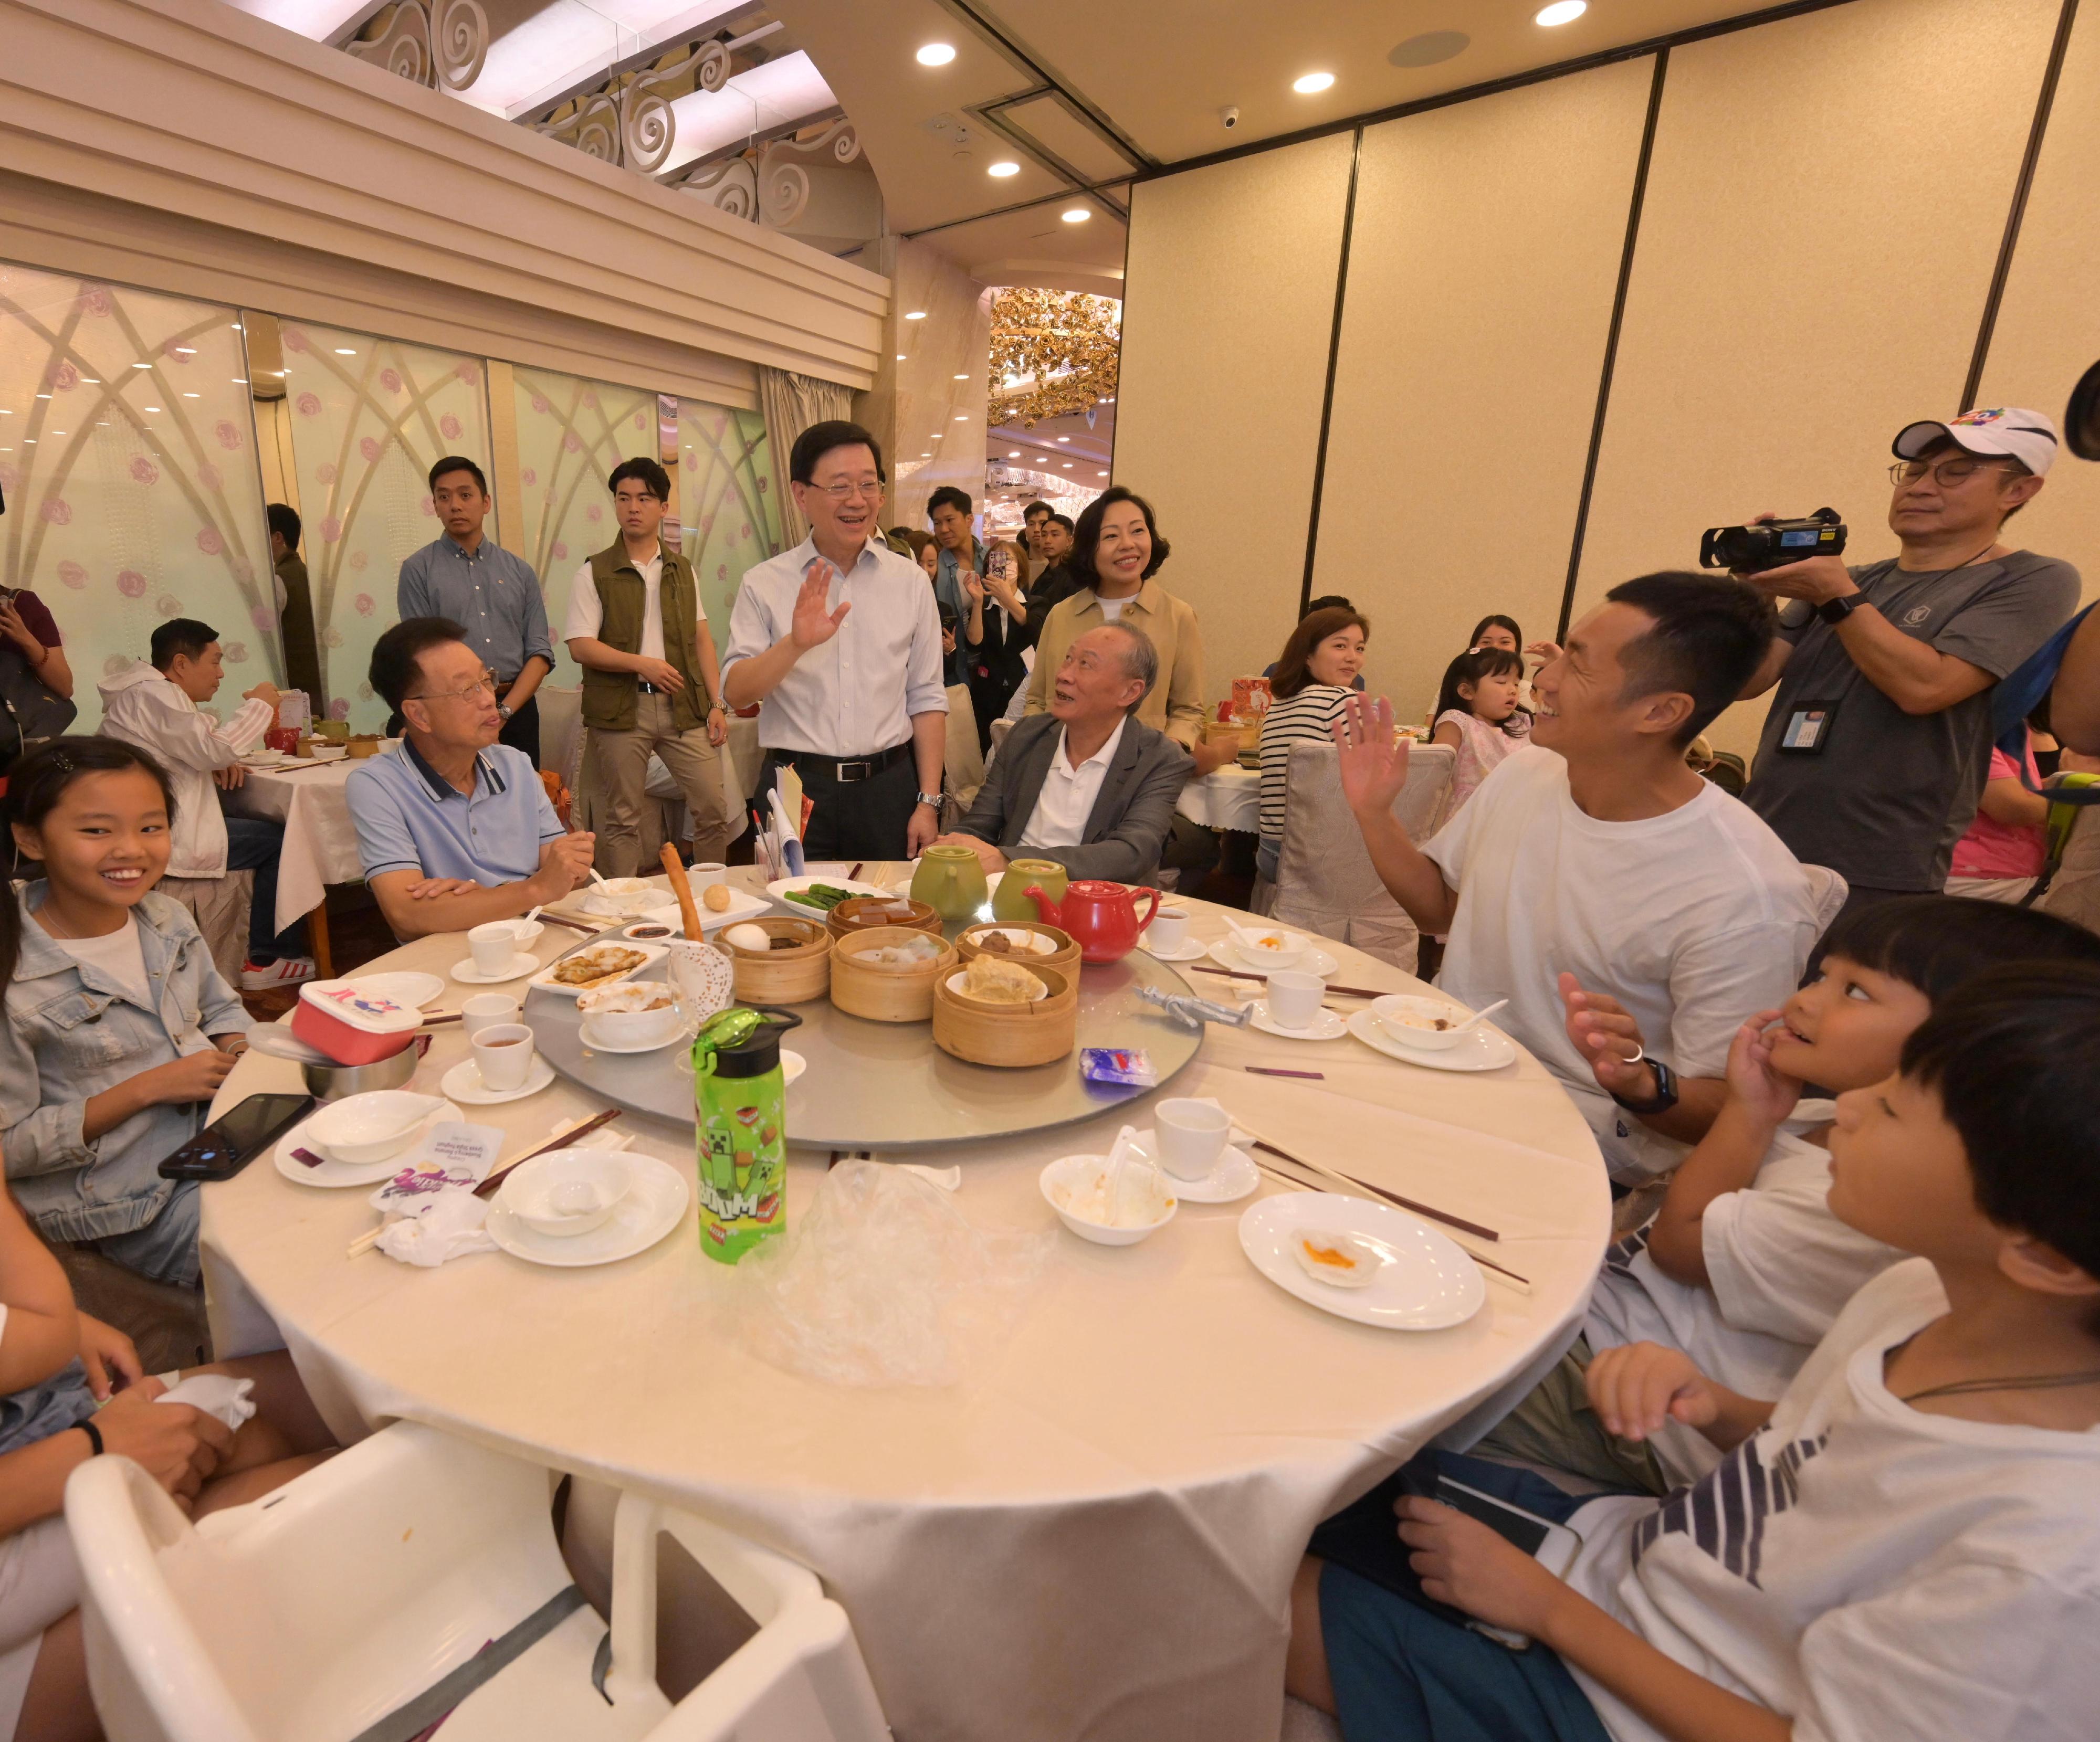 The Chief Executive, Mr John Lee, visited Yuen Long to gather public views on the upcoming Policy Address today (September 17). Photo shows Mr Lee (back row, third left), and the Secretary for Home and Youth Affairs, Miss Alice Mak (back row, fourth left), interacting with members of the public and listening to their views on the upcoming Policy Address.